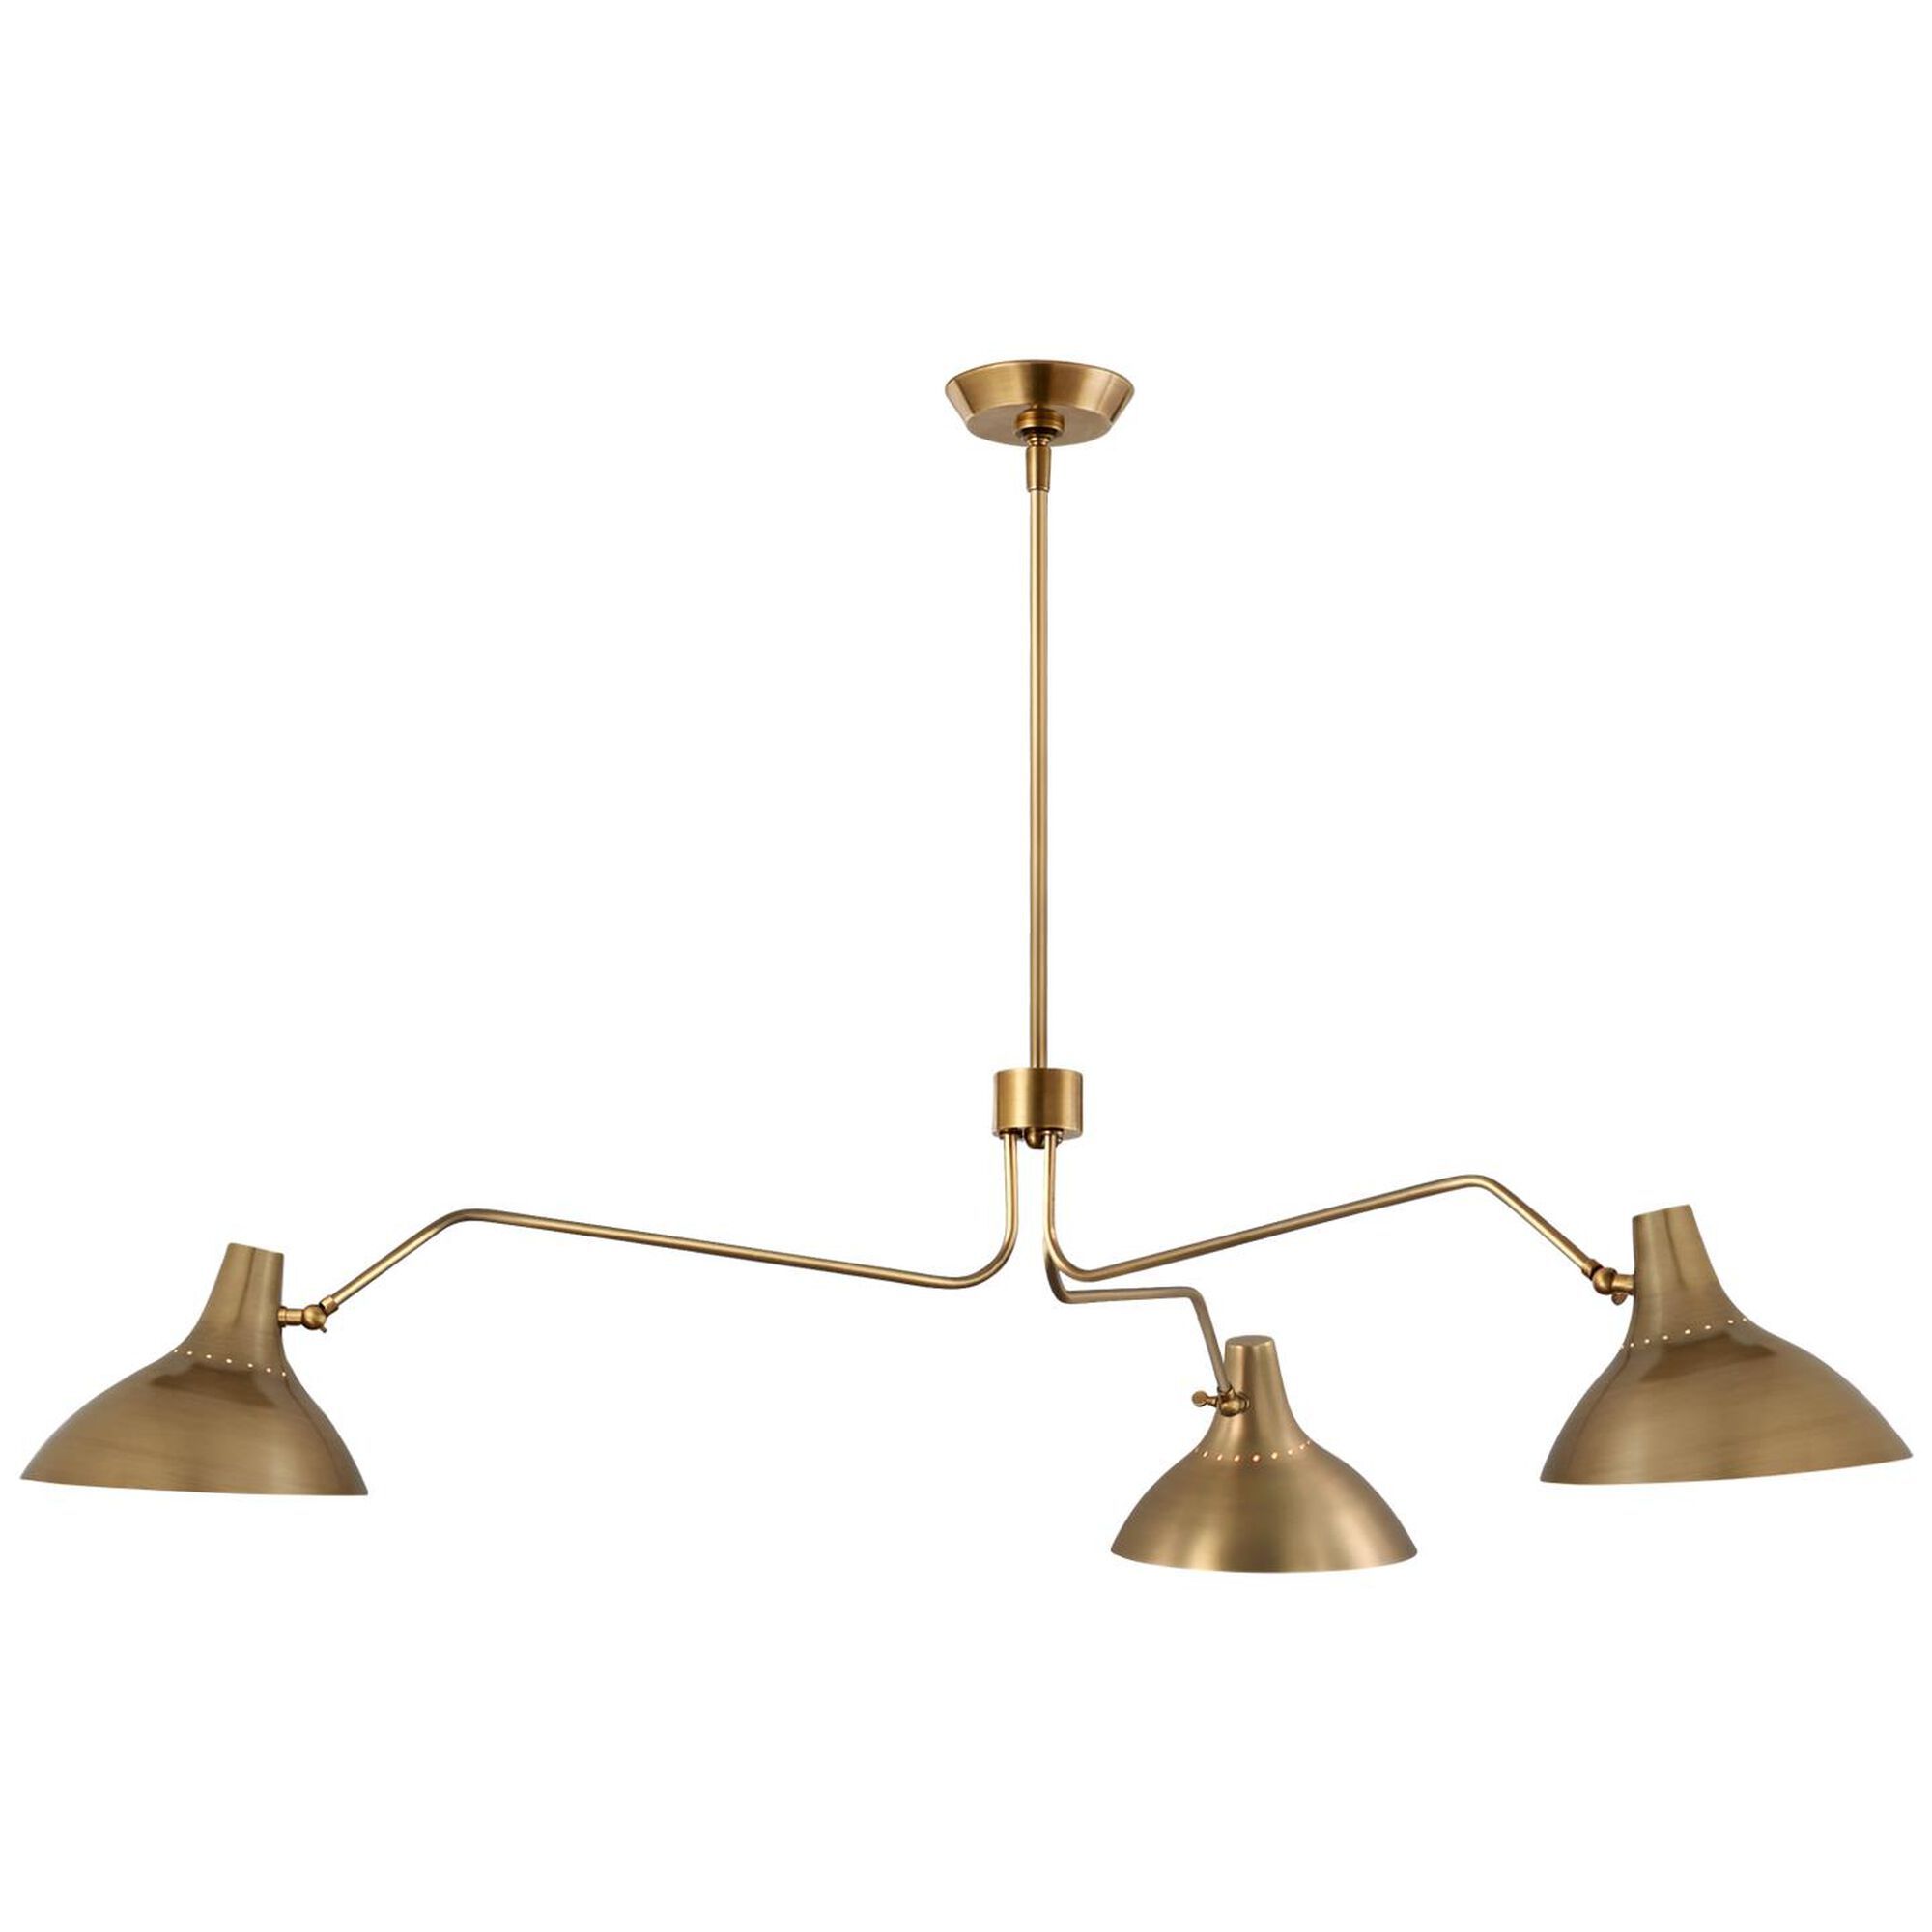 Aerin Charlton 55 Inch 3 Light Chandelier by Visual Comfort and Co. | Capitol Lighting 1800lighting.com